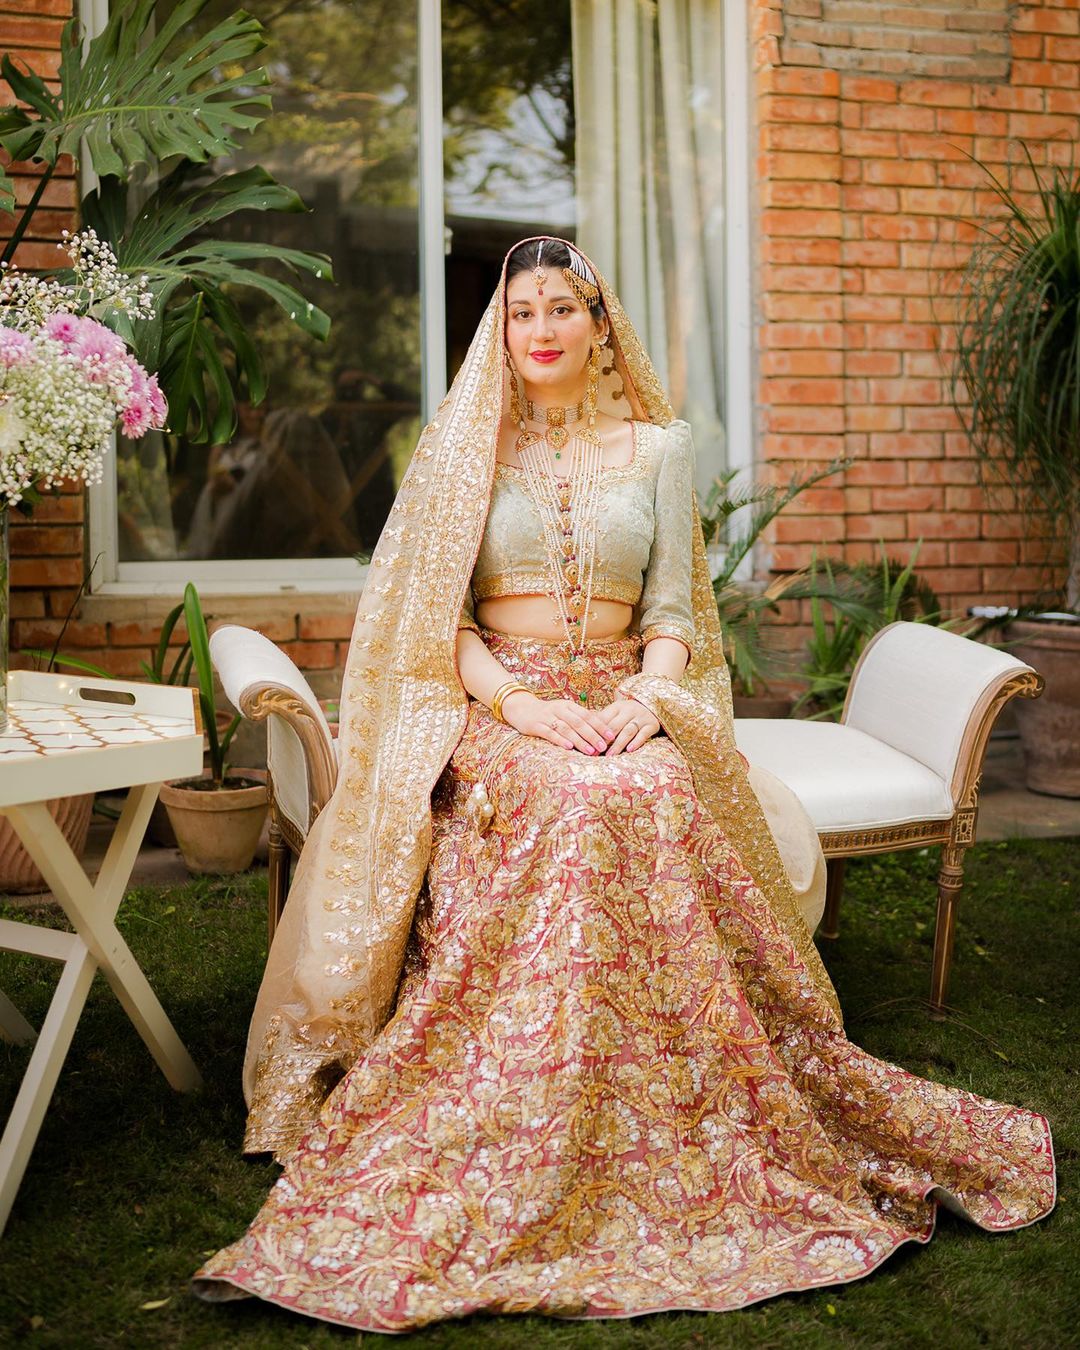 Latest Pakistani Bridal Dresses Designs & Trends with Pictures